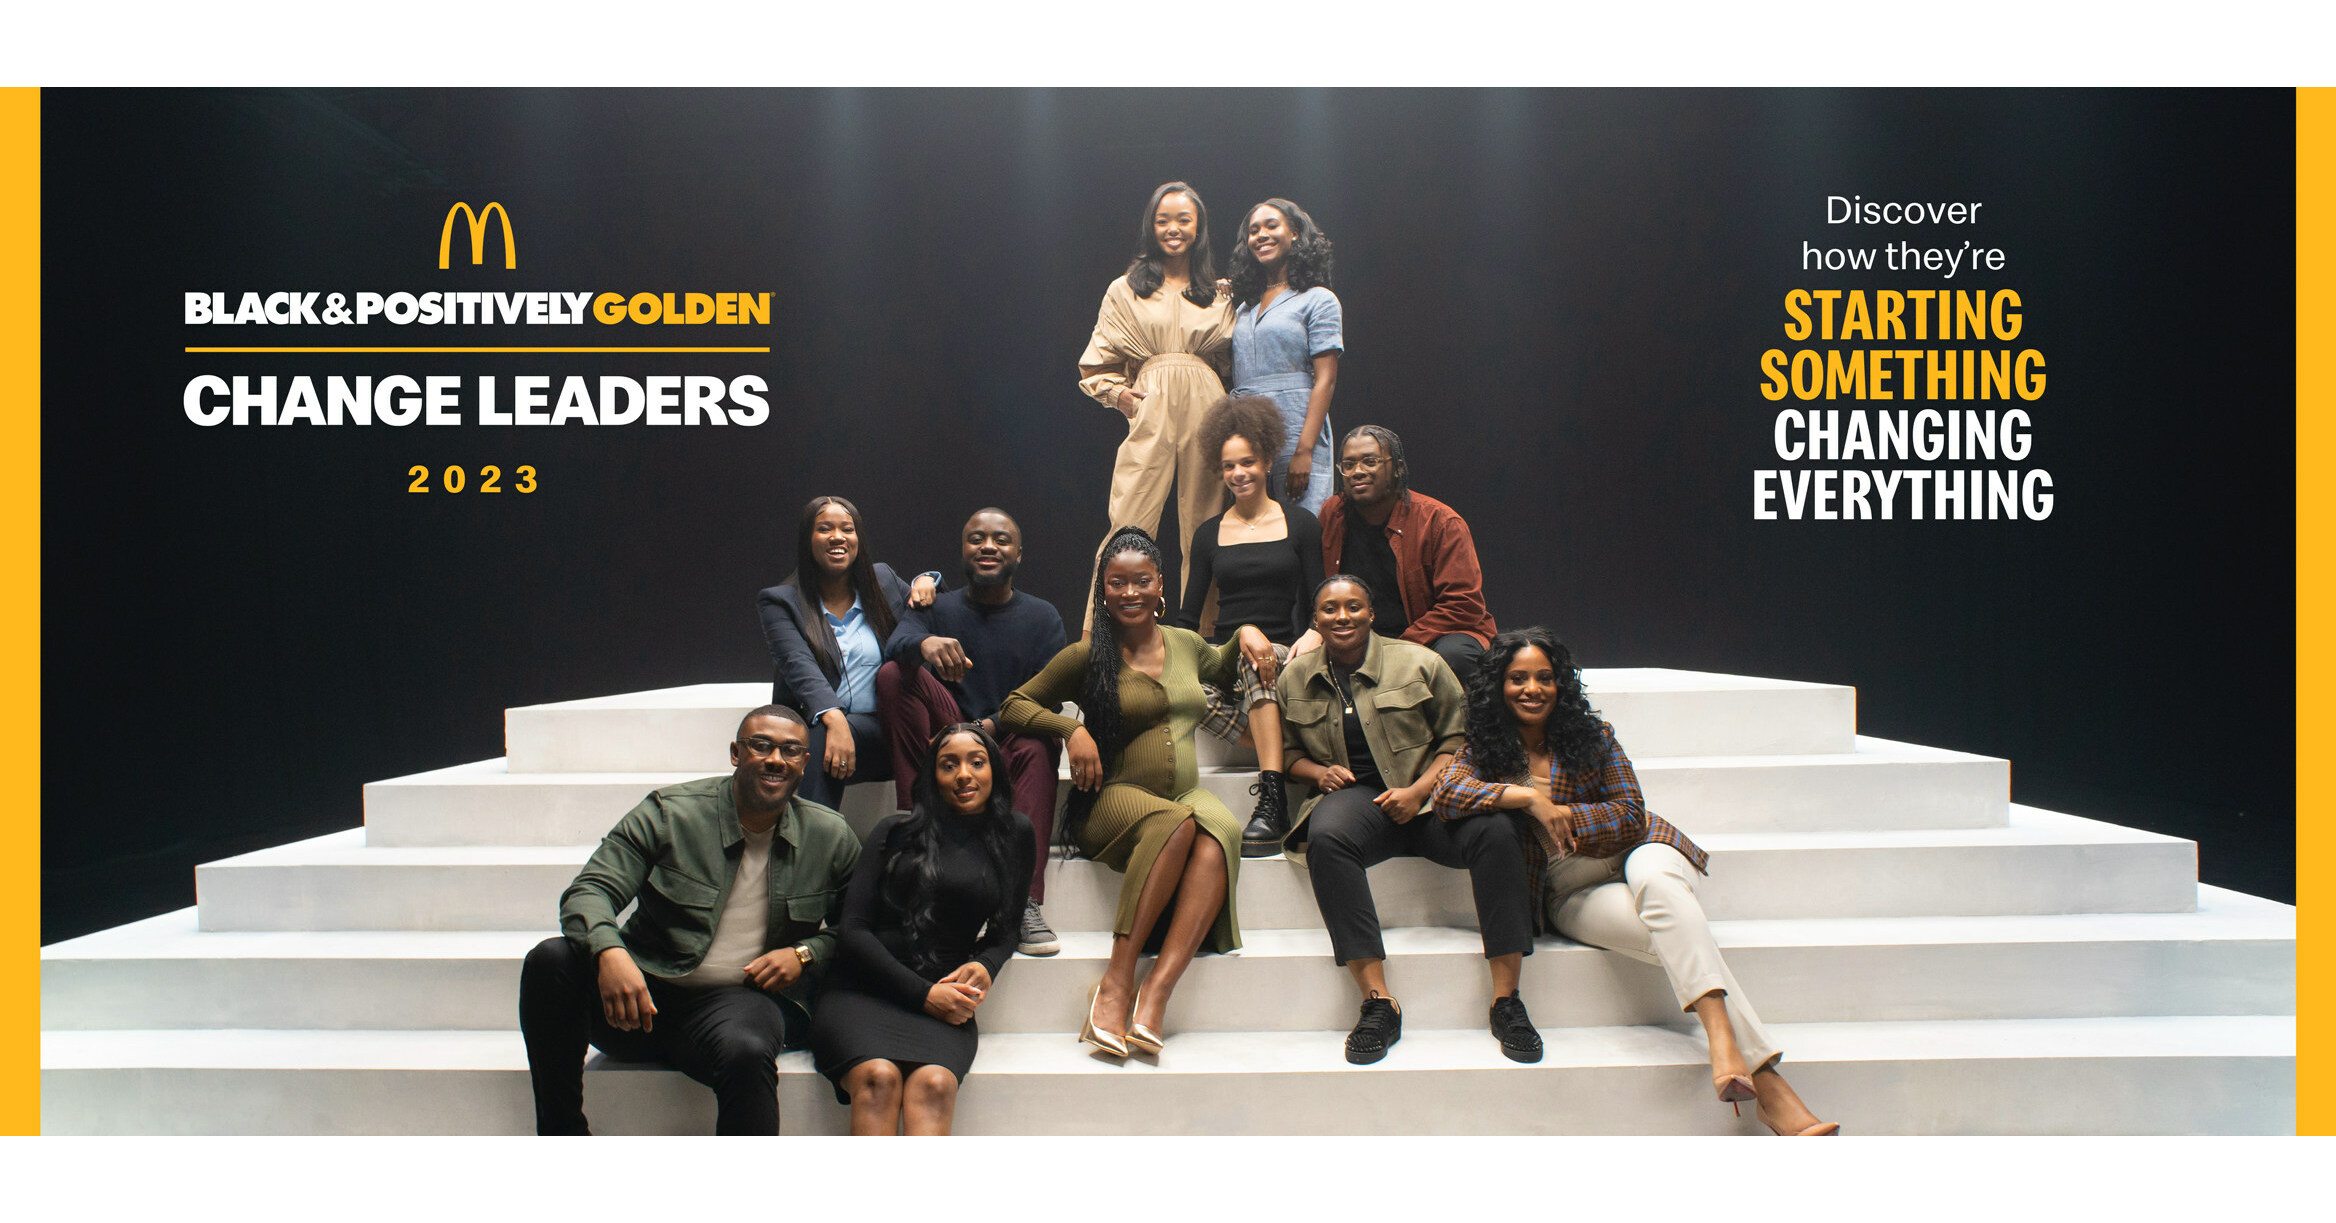 McDonald's USA ® Joins Forces with Keke Palmer to Shine a Light on Ten Black Visionaries Through